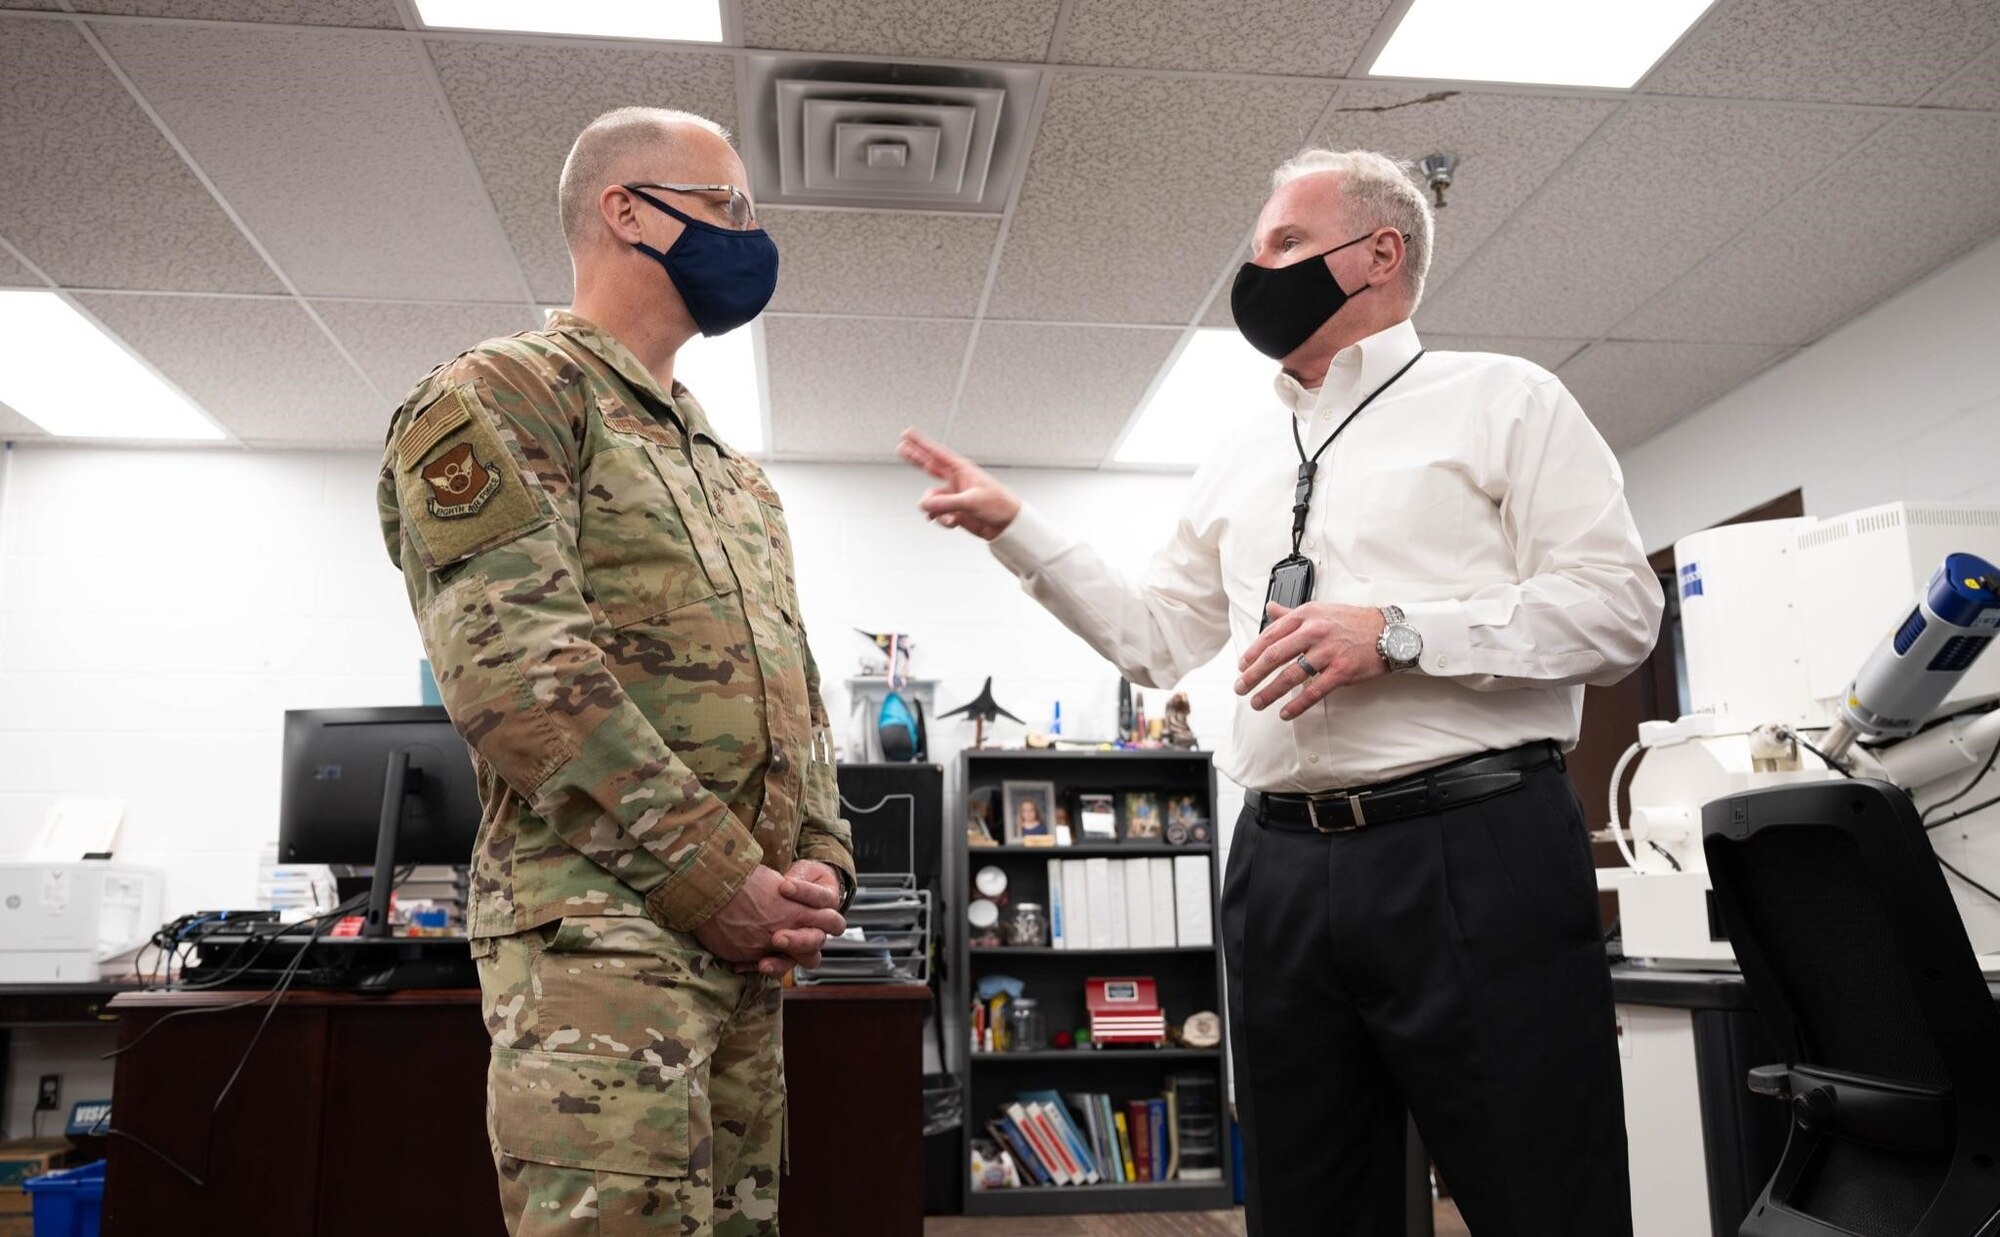 Maj. Gen. Mark Weatherington, 8th Air Force and Joint-Global Strike Operations Center commander, meets with 28th Maintenance Group engineers to discuss possible future collaborations with area universities and industries during his visit at Ellsworth Air Force Base, S.D., May 4, 2021.